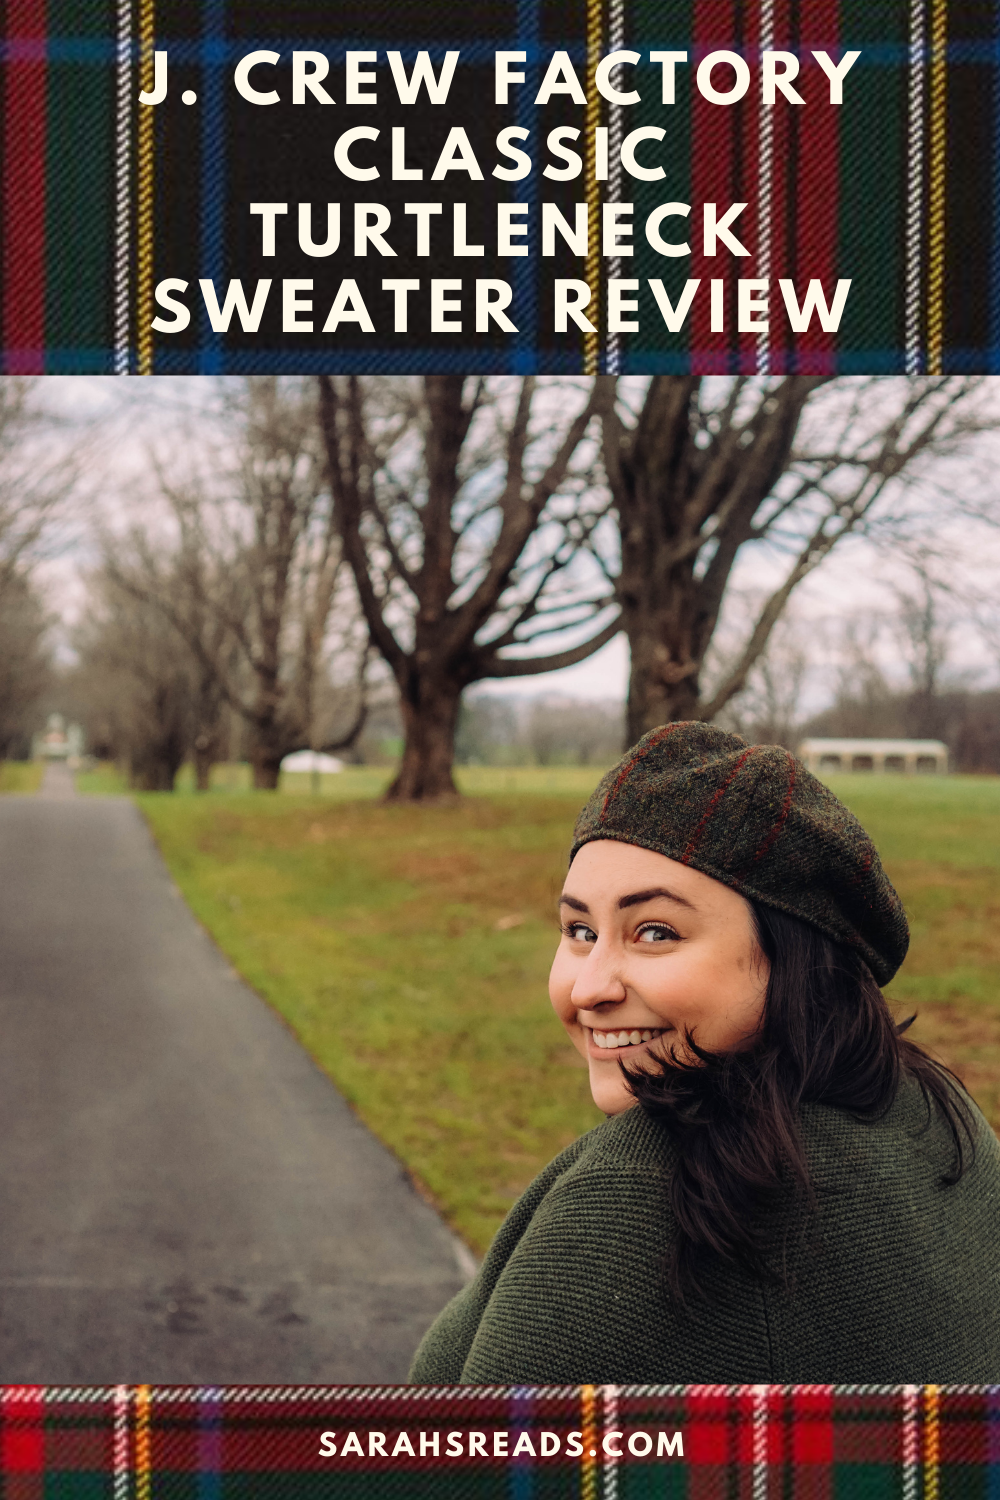 J. Crew Factory Classic Turtleneck Sweater Review